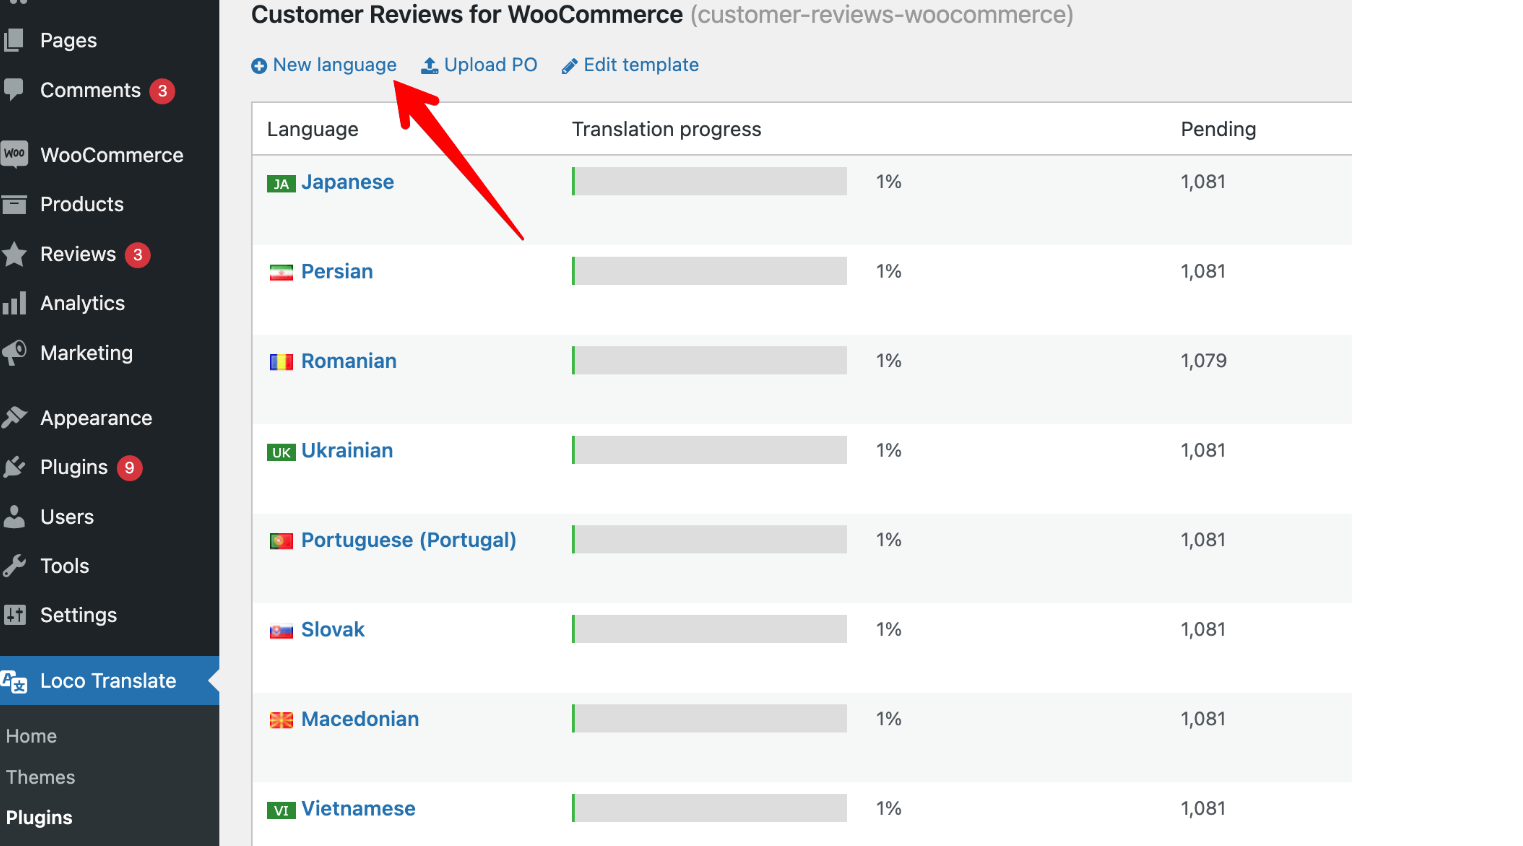 Customer Reviews for WooCommerce z Loco - screen